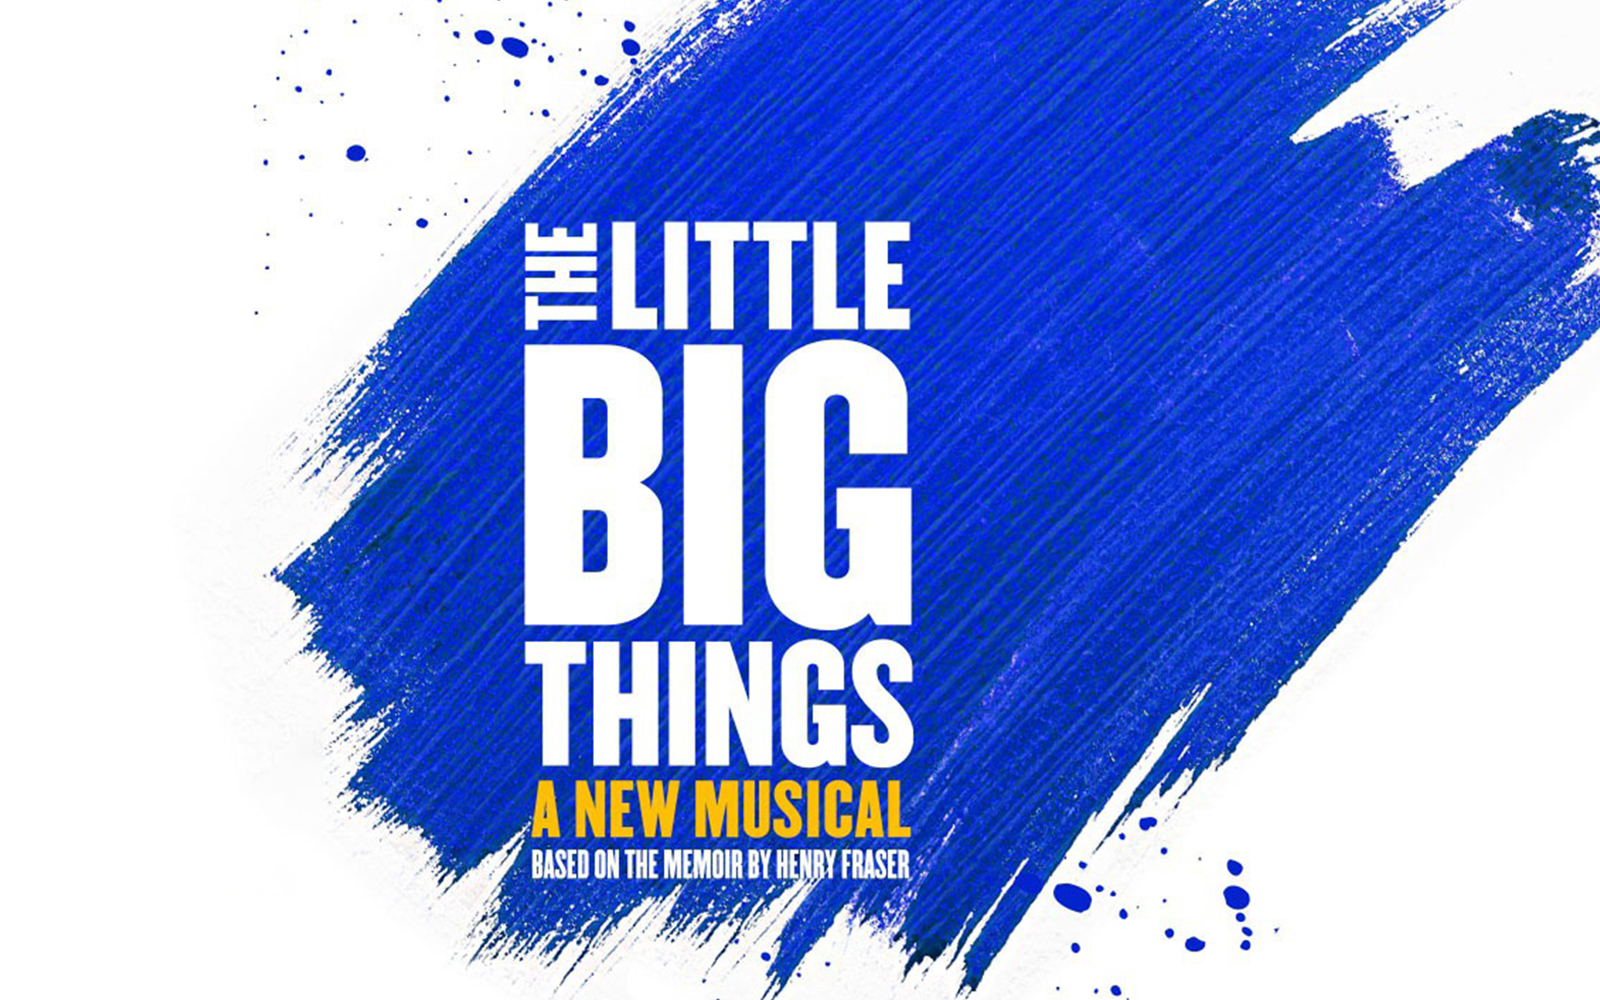 Image of The Little Big Things